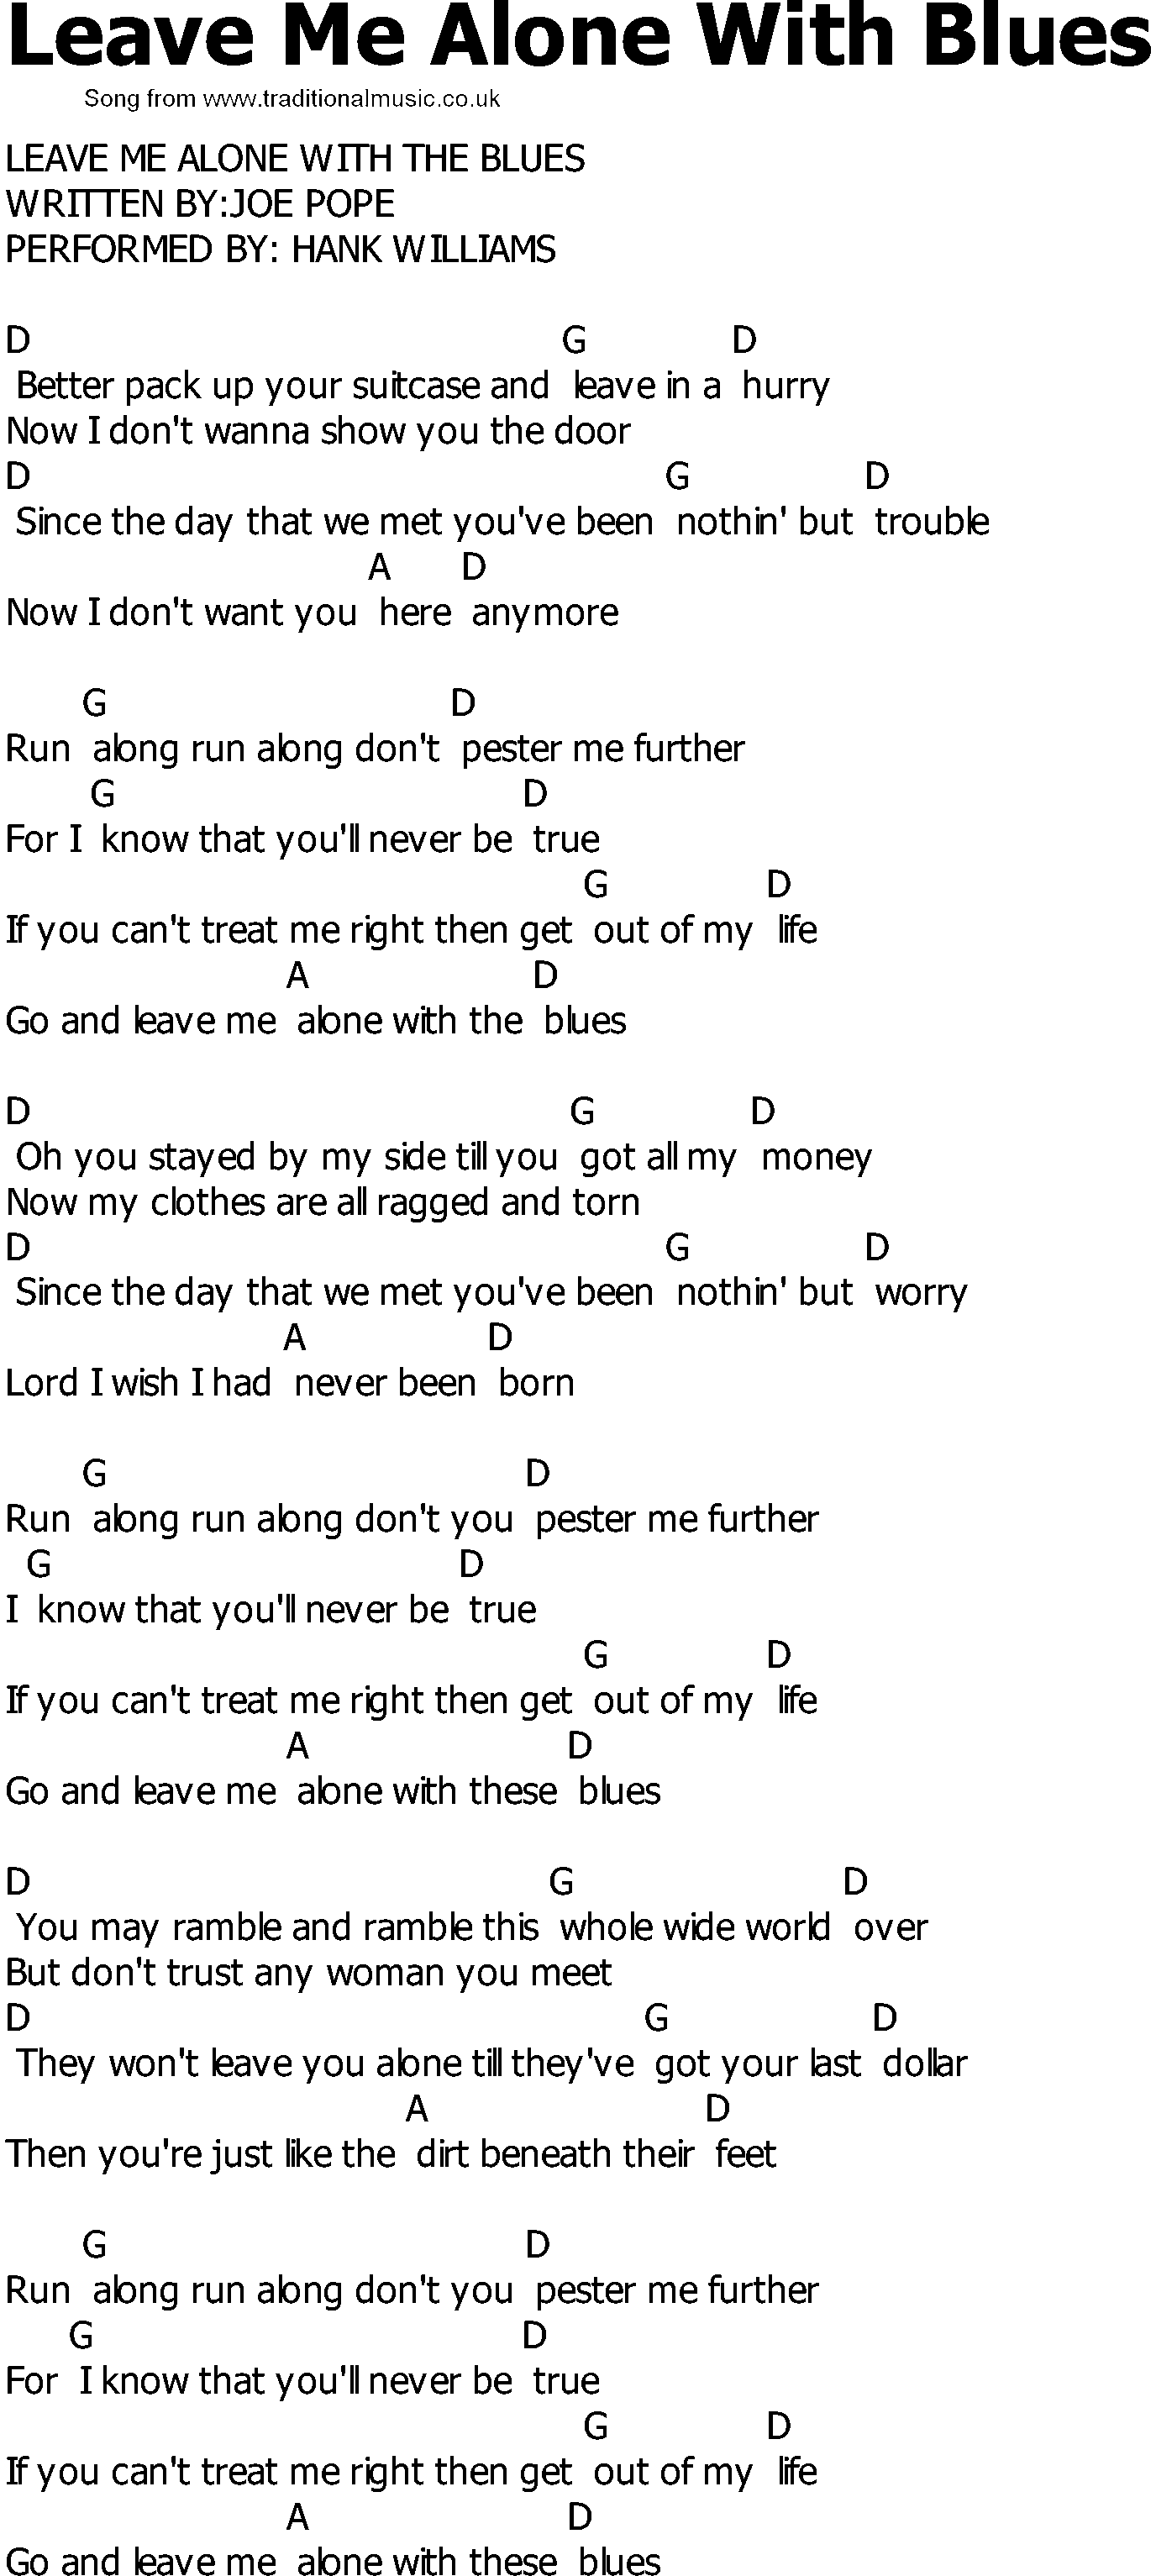 Old Country song lyrics with chords - Leave Me Alone With Blues